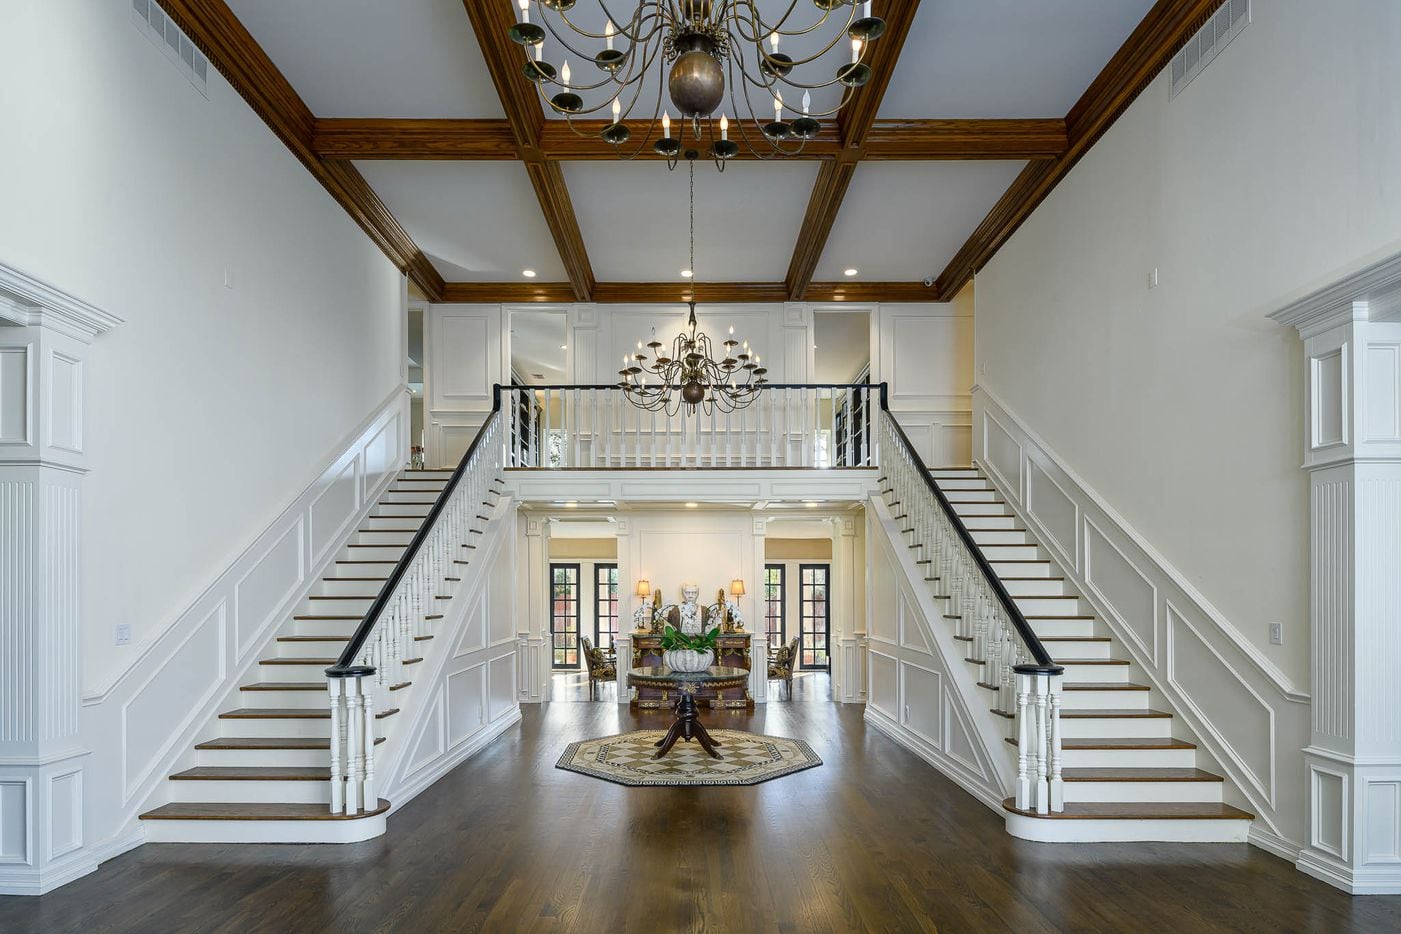 Take a look at the house at 5130 Radbrook Place in Dallas, TX.